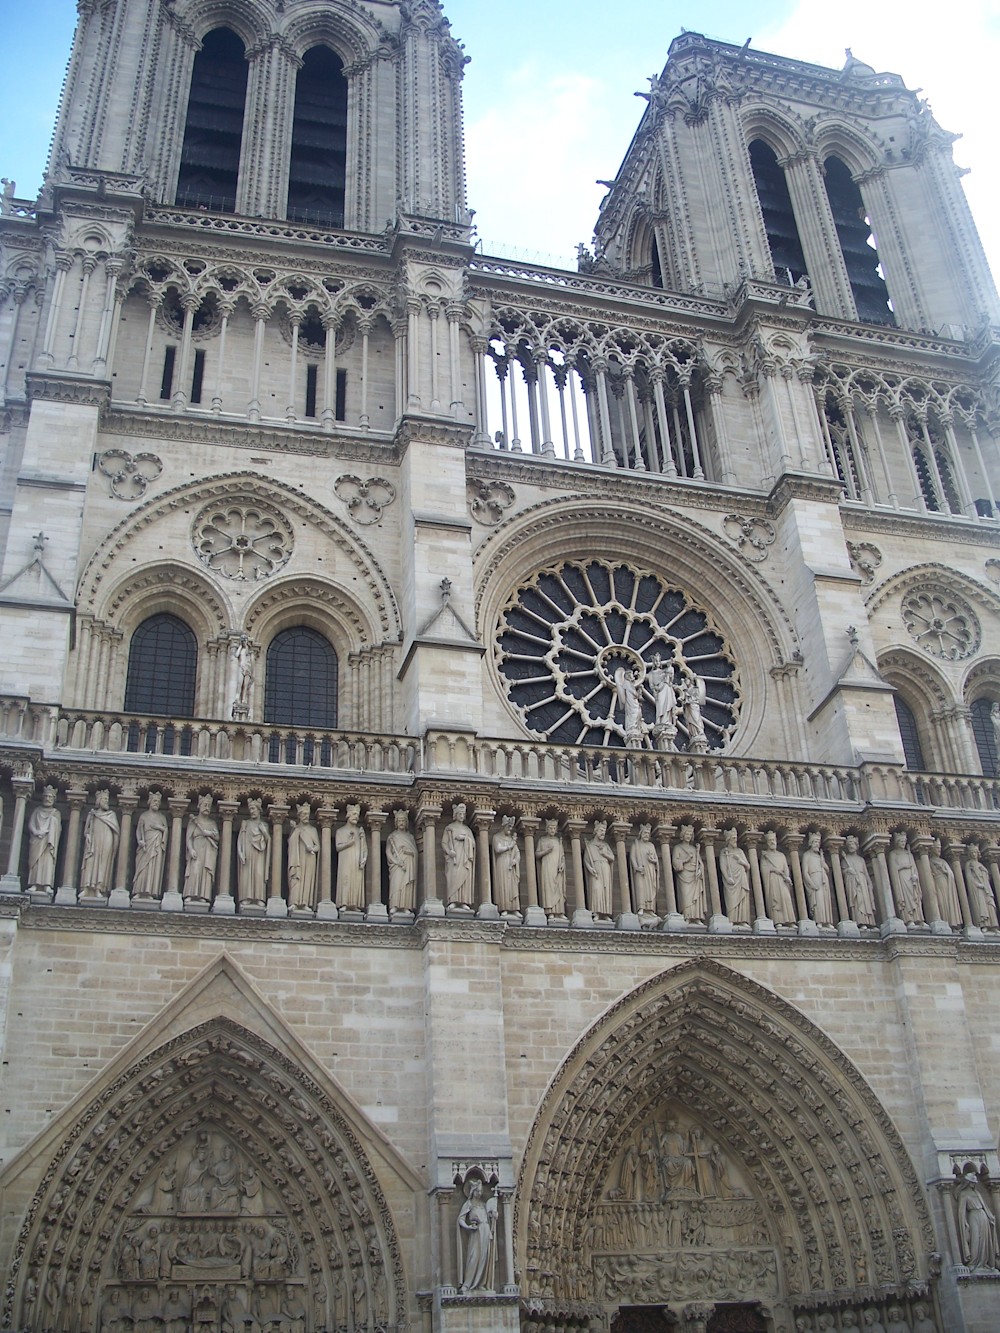 The Rose window and twin towers of the front of the Cathedral of Notre Dame in Paris